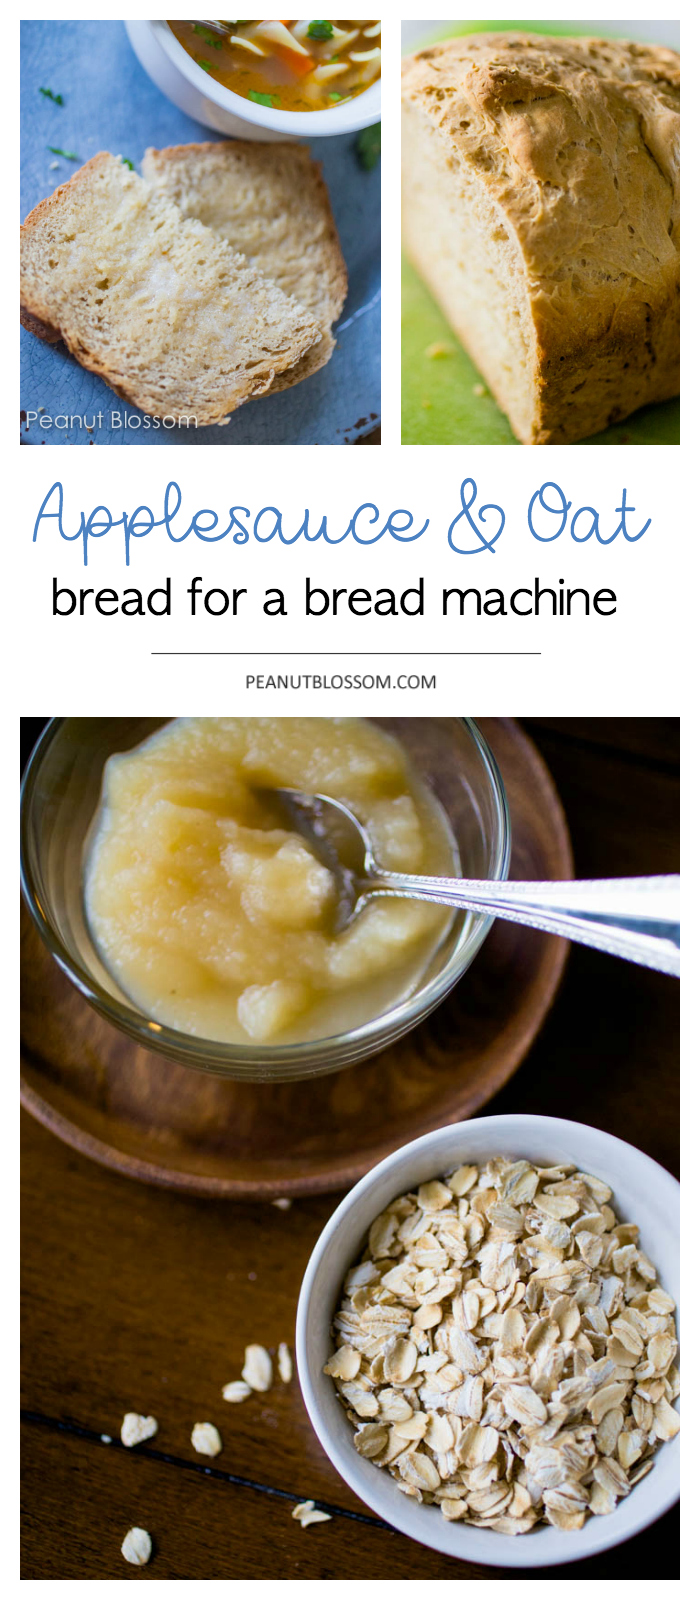 Applesauce & Oat bread for a bread machine, perfect for beginner bakers.